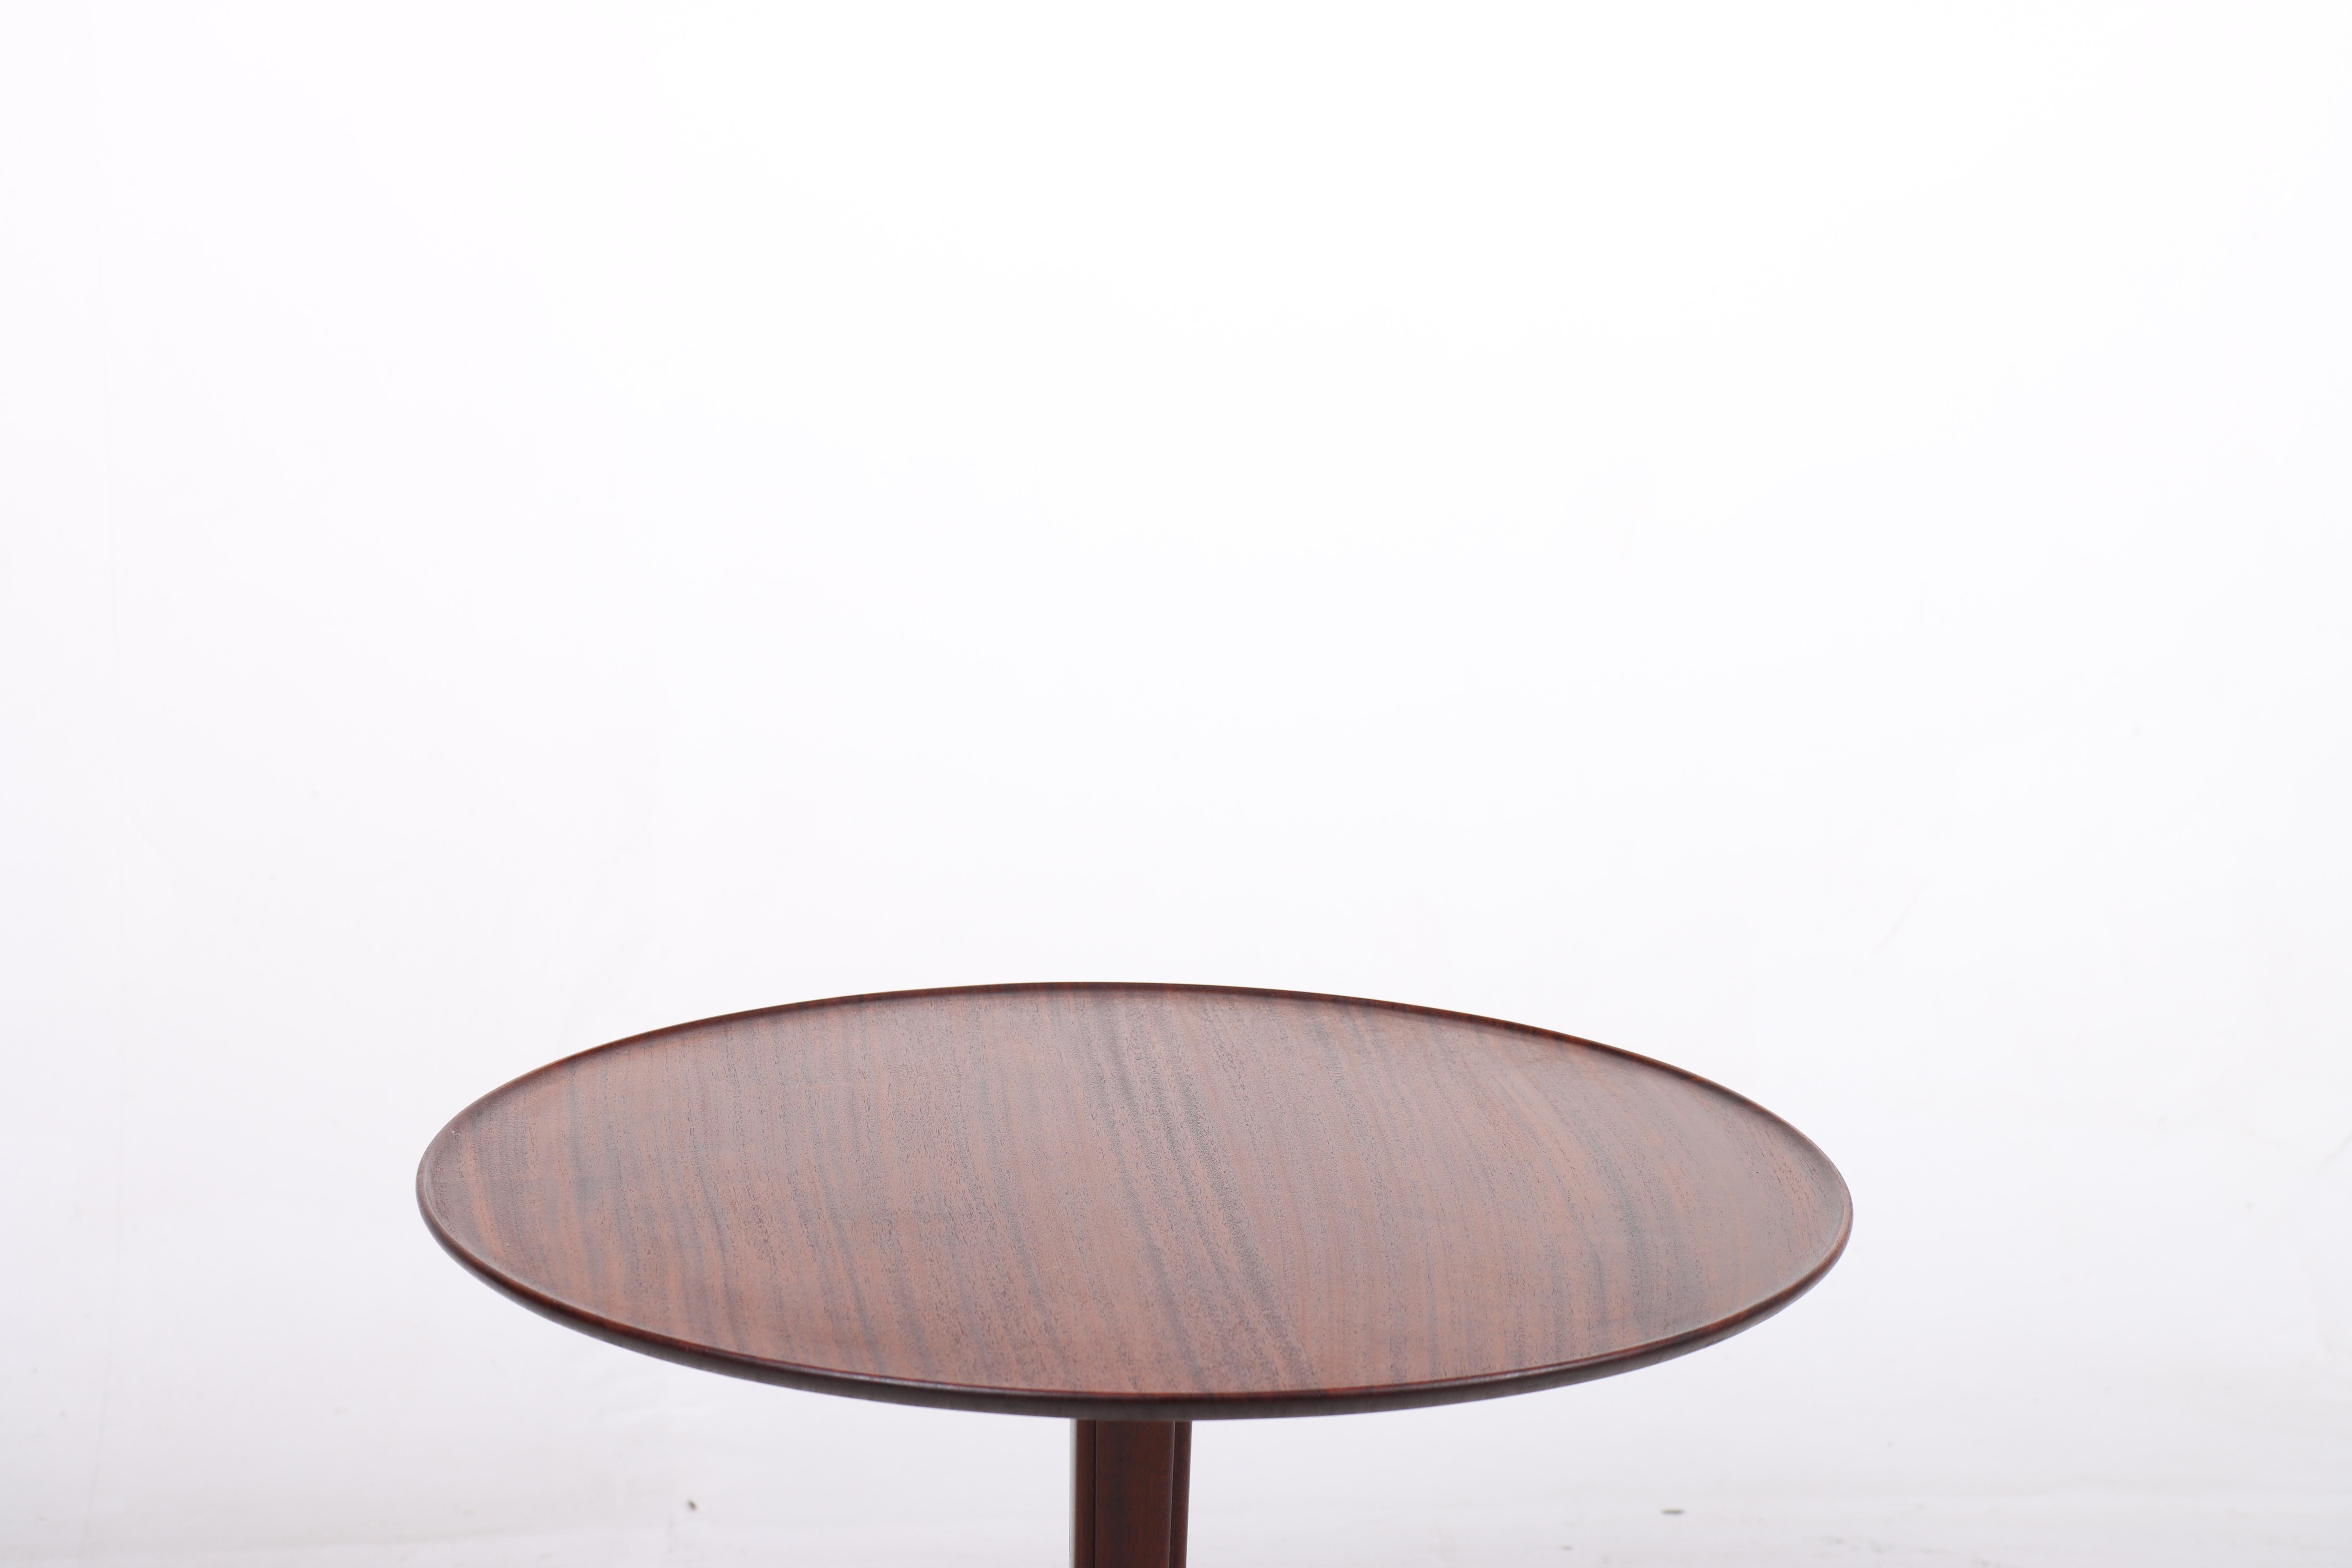 Elegant low table in mahogany by designer and cabinetmaker Frits Henningsen. Made in Denmark, circa 1945. Great original condition.